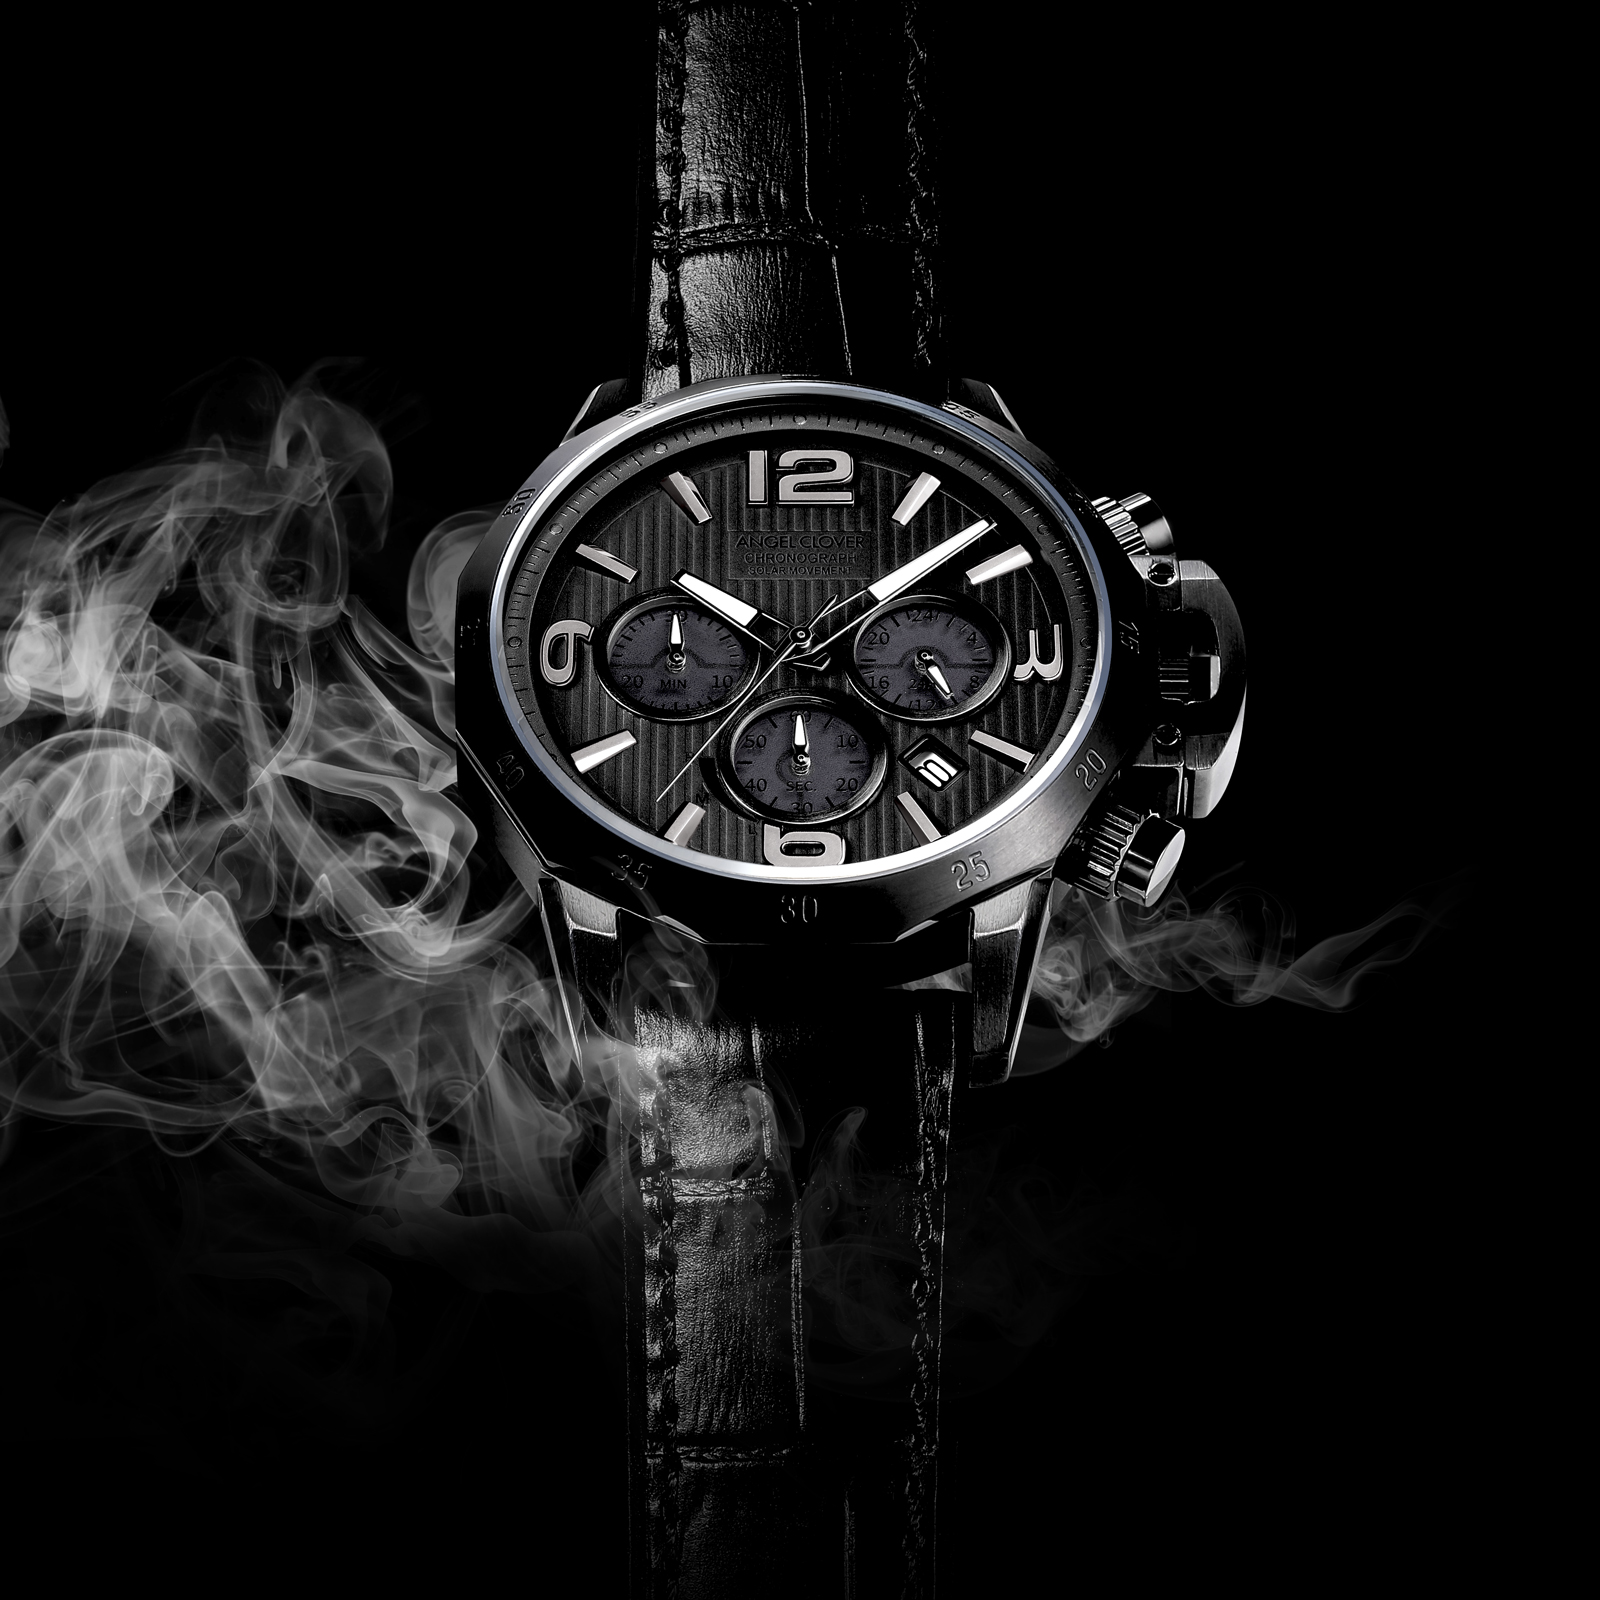 TIME CRAFT SOLAR ALL BLACK ONTIME & MOVE LIMITED EDITION 